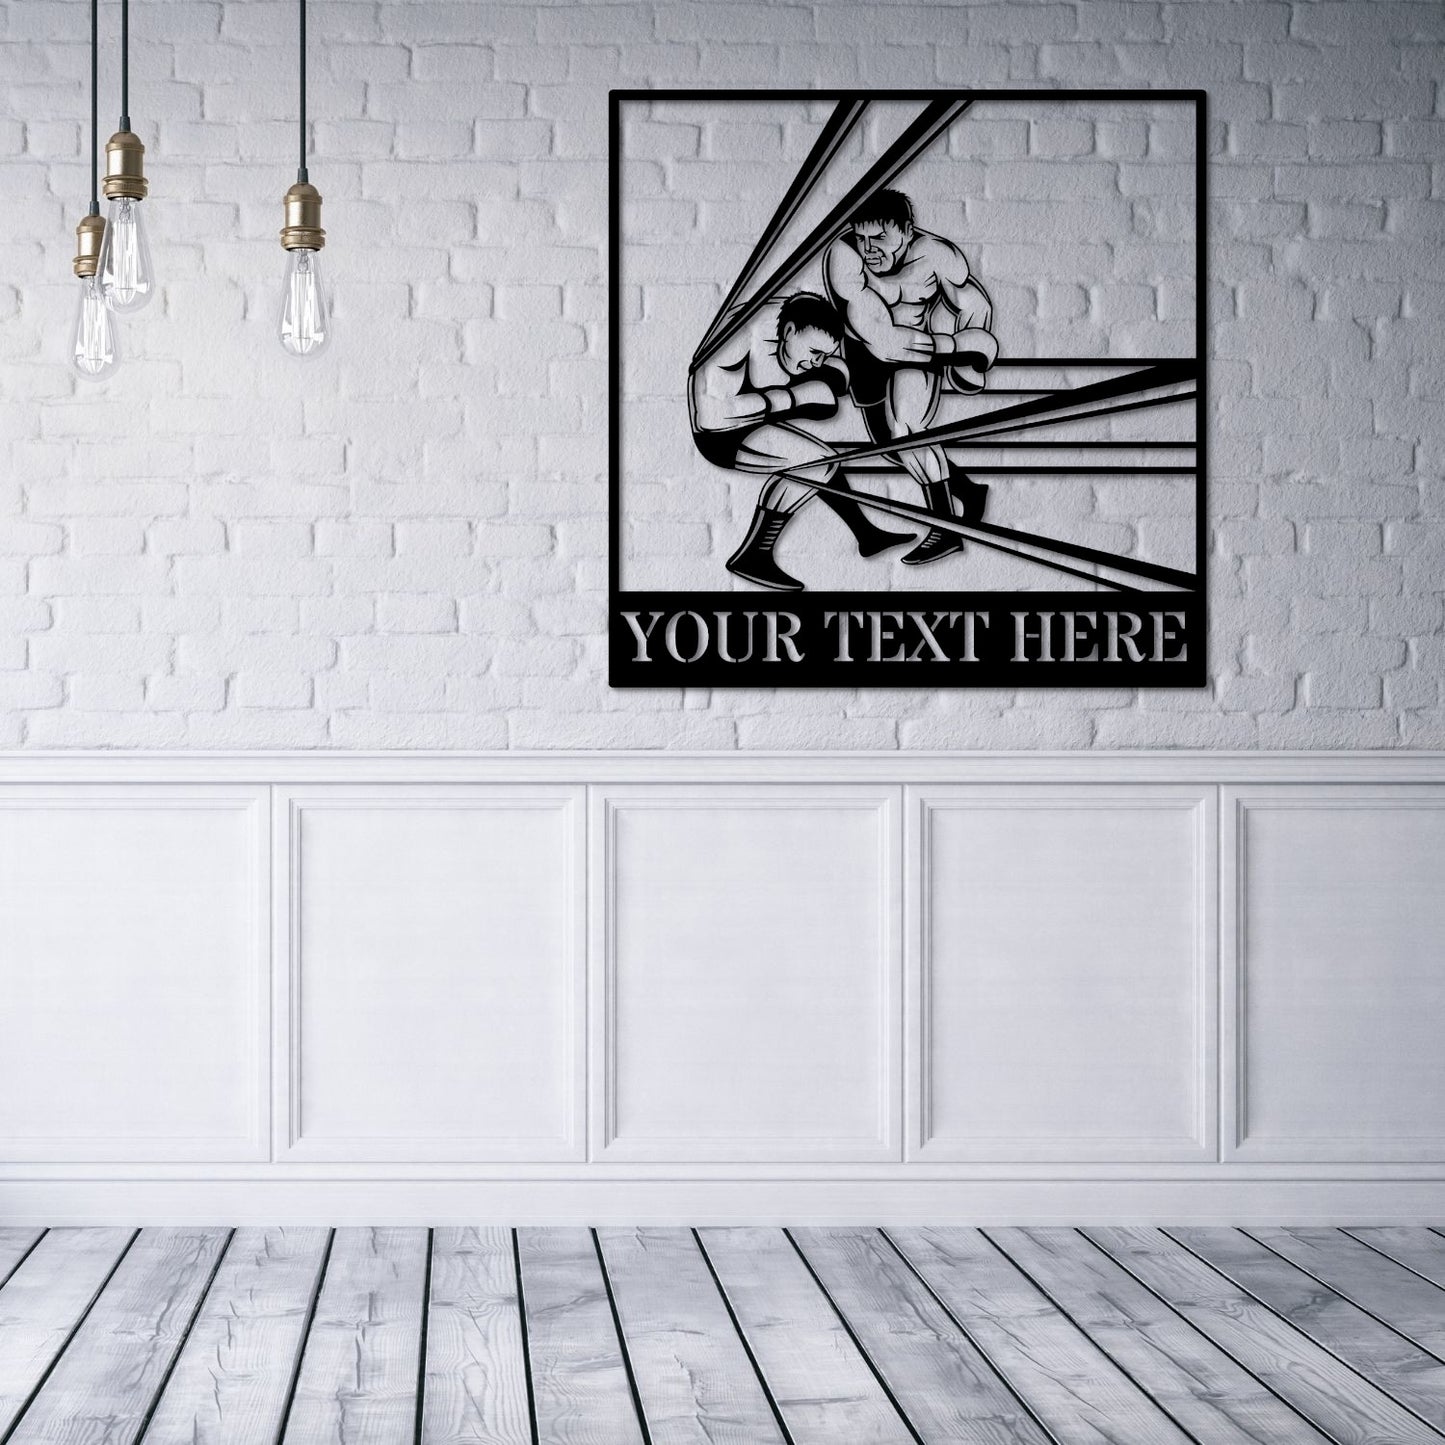 Personalized Boxing Fight Name Metal Sign. Custom Boxer Wall Hanging Gift. Boxing Champion Sign. Boxing Arena Decor. Sport Fighting artwork